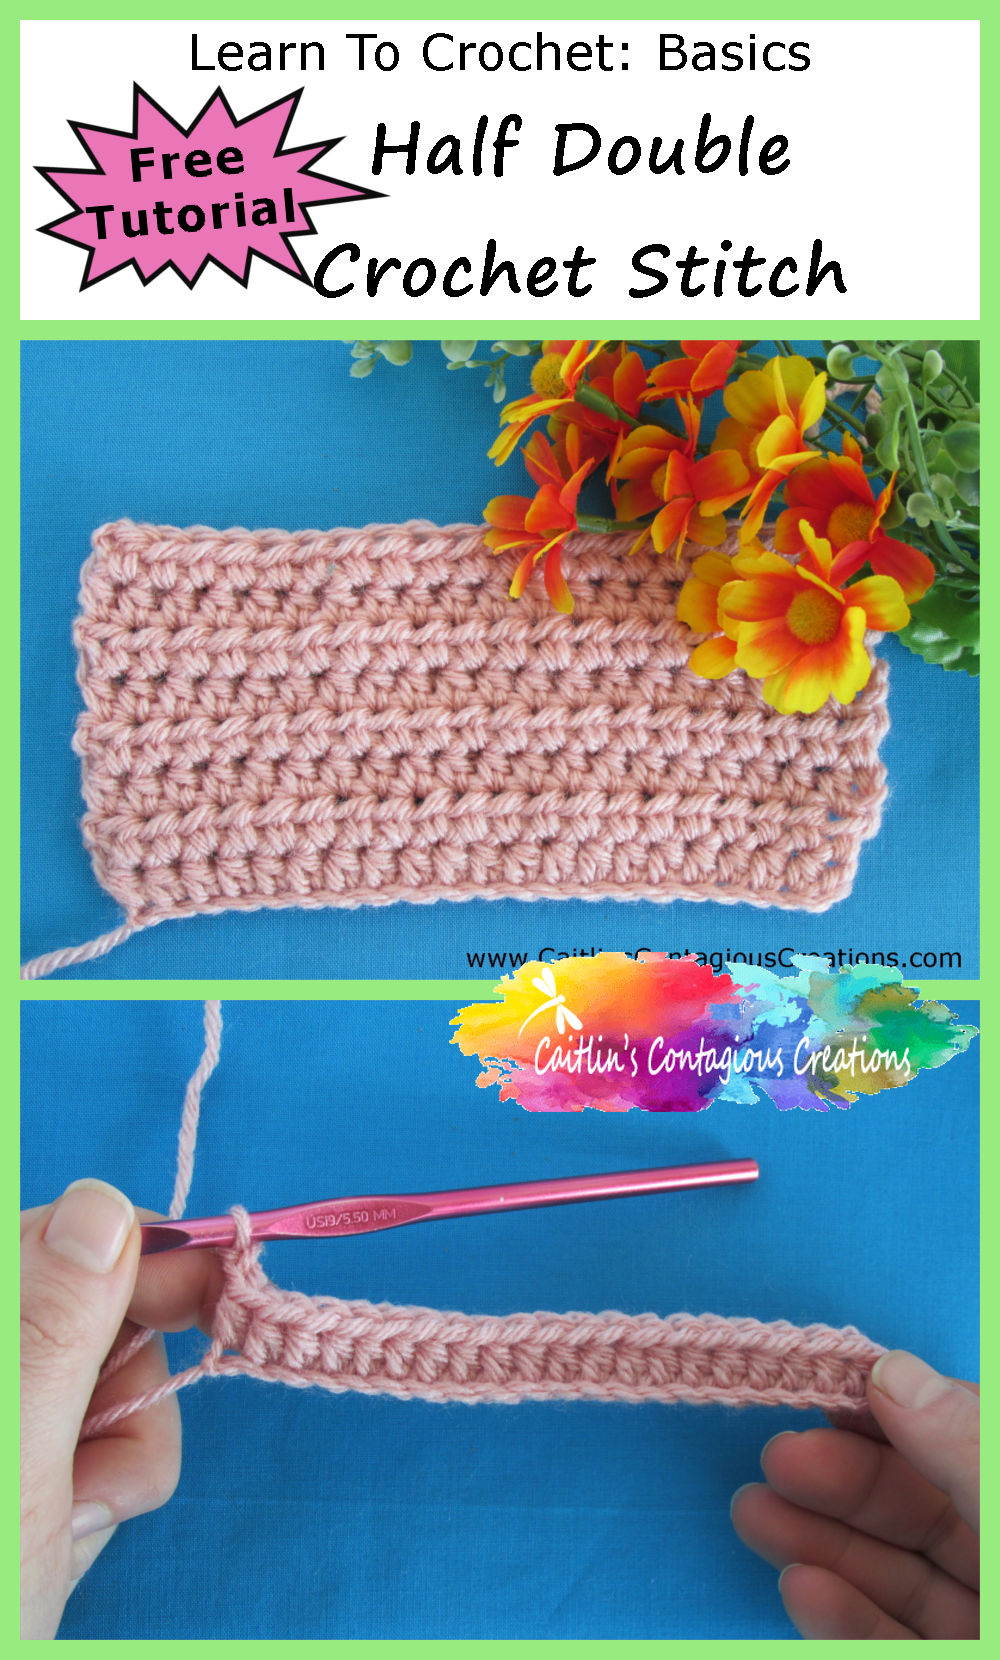 A Half Double Crochet HDC Stitch Lesson with written directions and step by step picture instructions that will guide any beginner through completing this basic crochet stitch. | Caitlin's Contagious Creations #LearnToCrochet #Crochet101